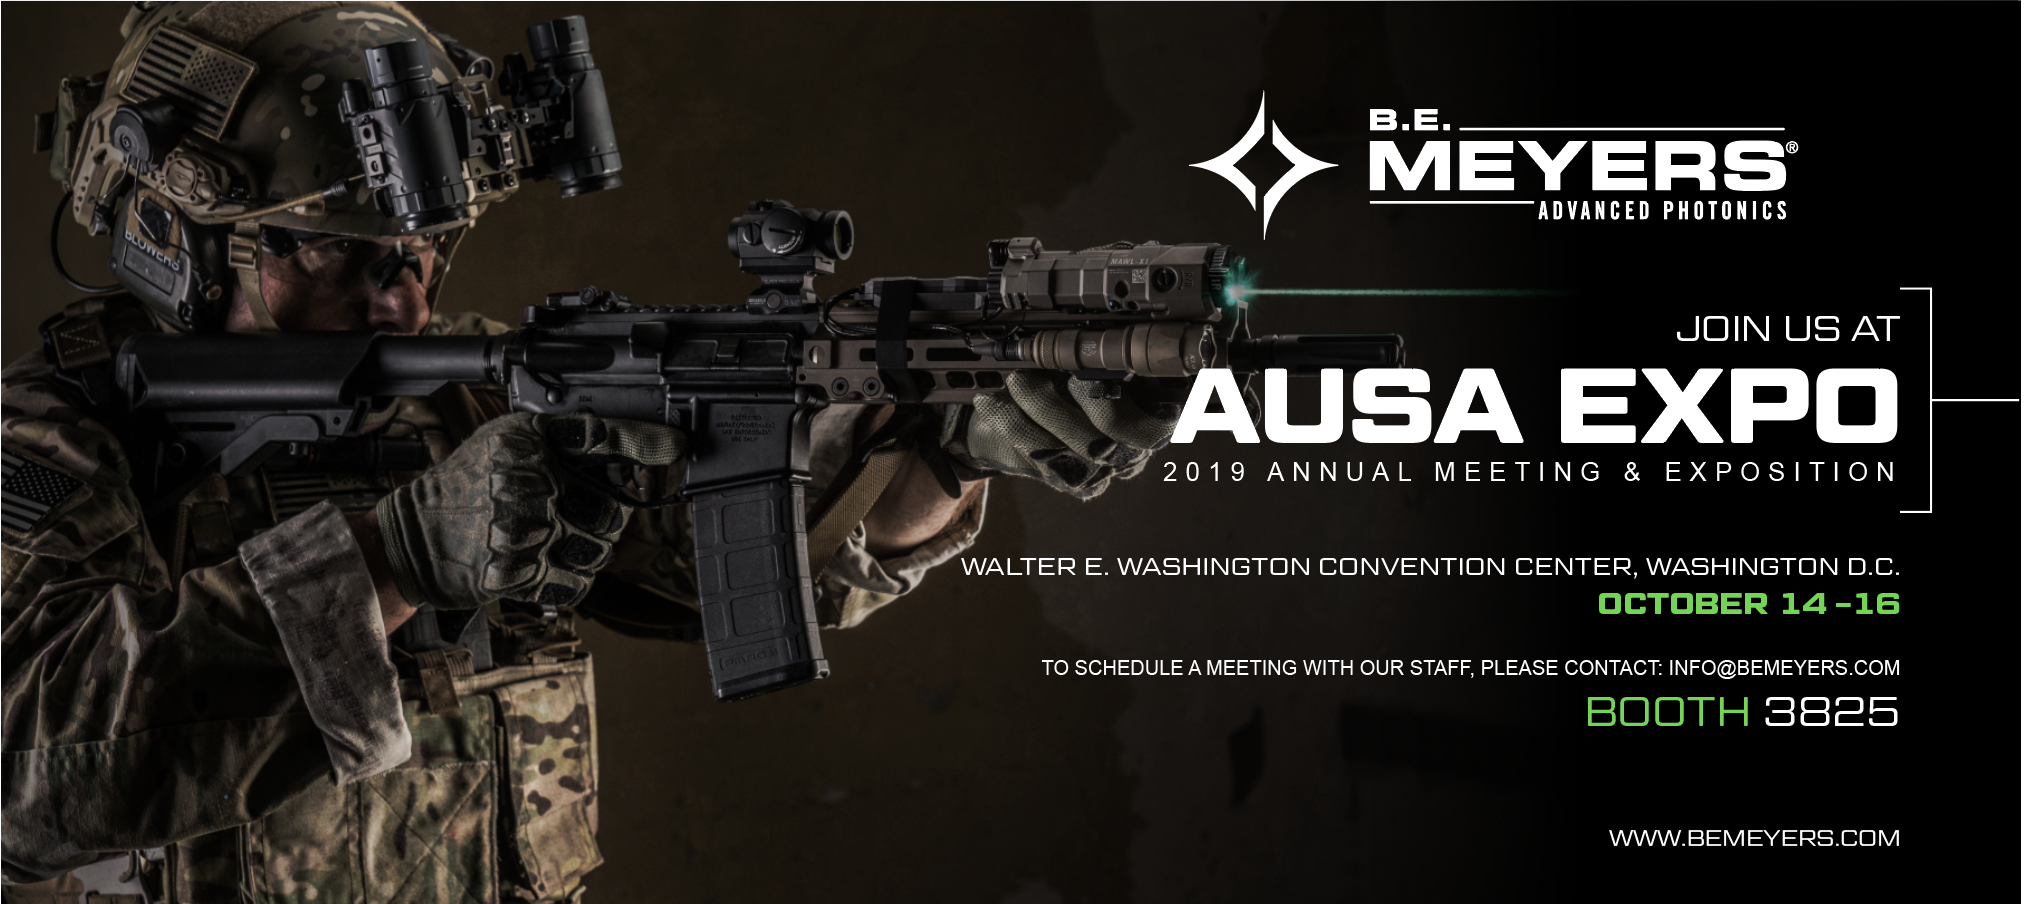 B.E. MEYERS & CO. EXHIBITING AT BOOTH #3825 AT AUSA 2019